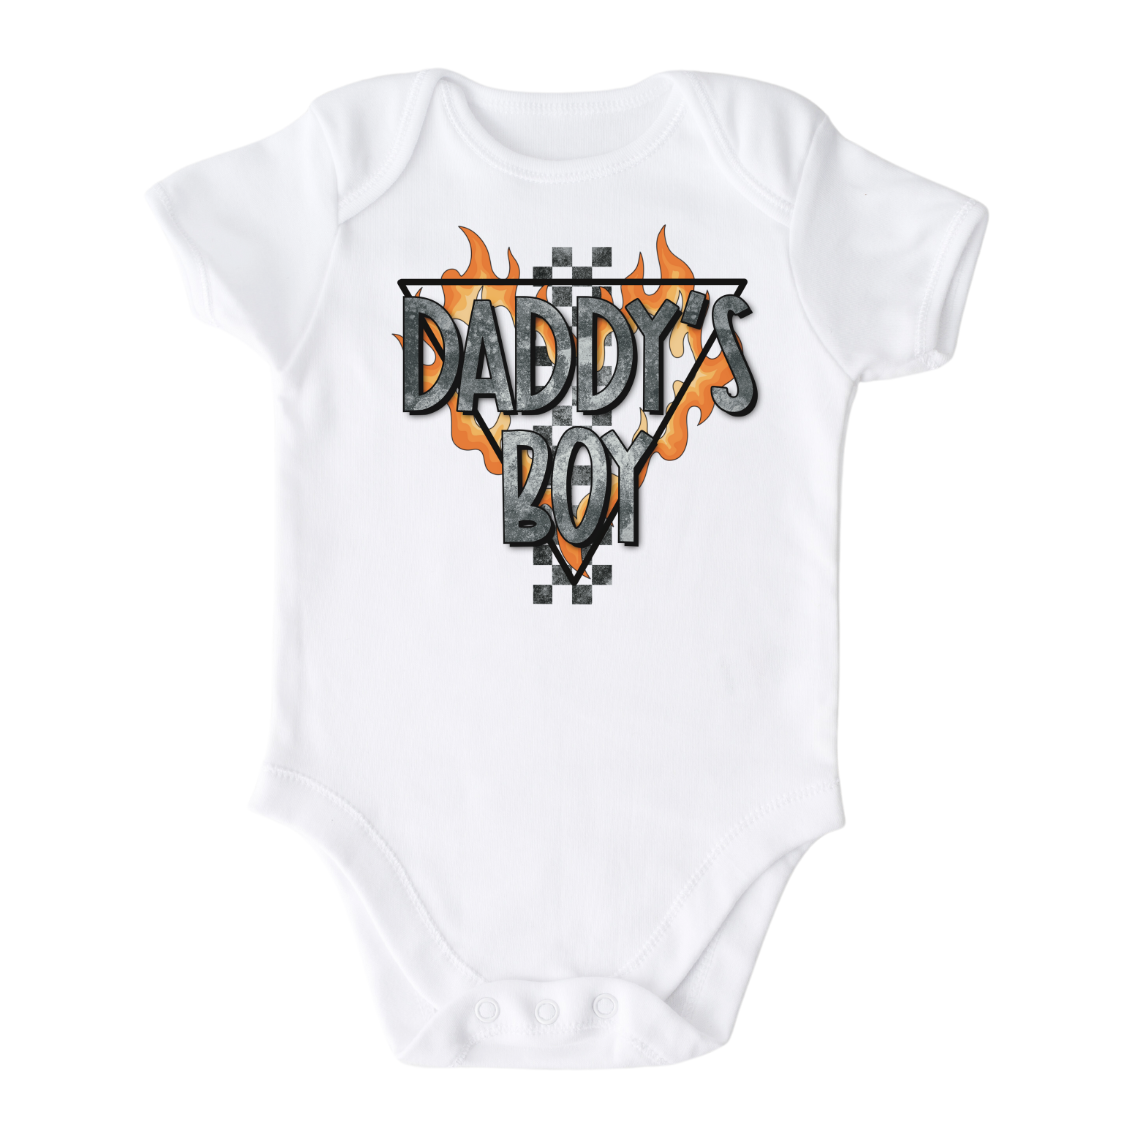 Cute Shirt Baby Onesie® Daddy's Boy Cute Baby Clothing for Baby Shower Gift